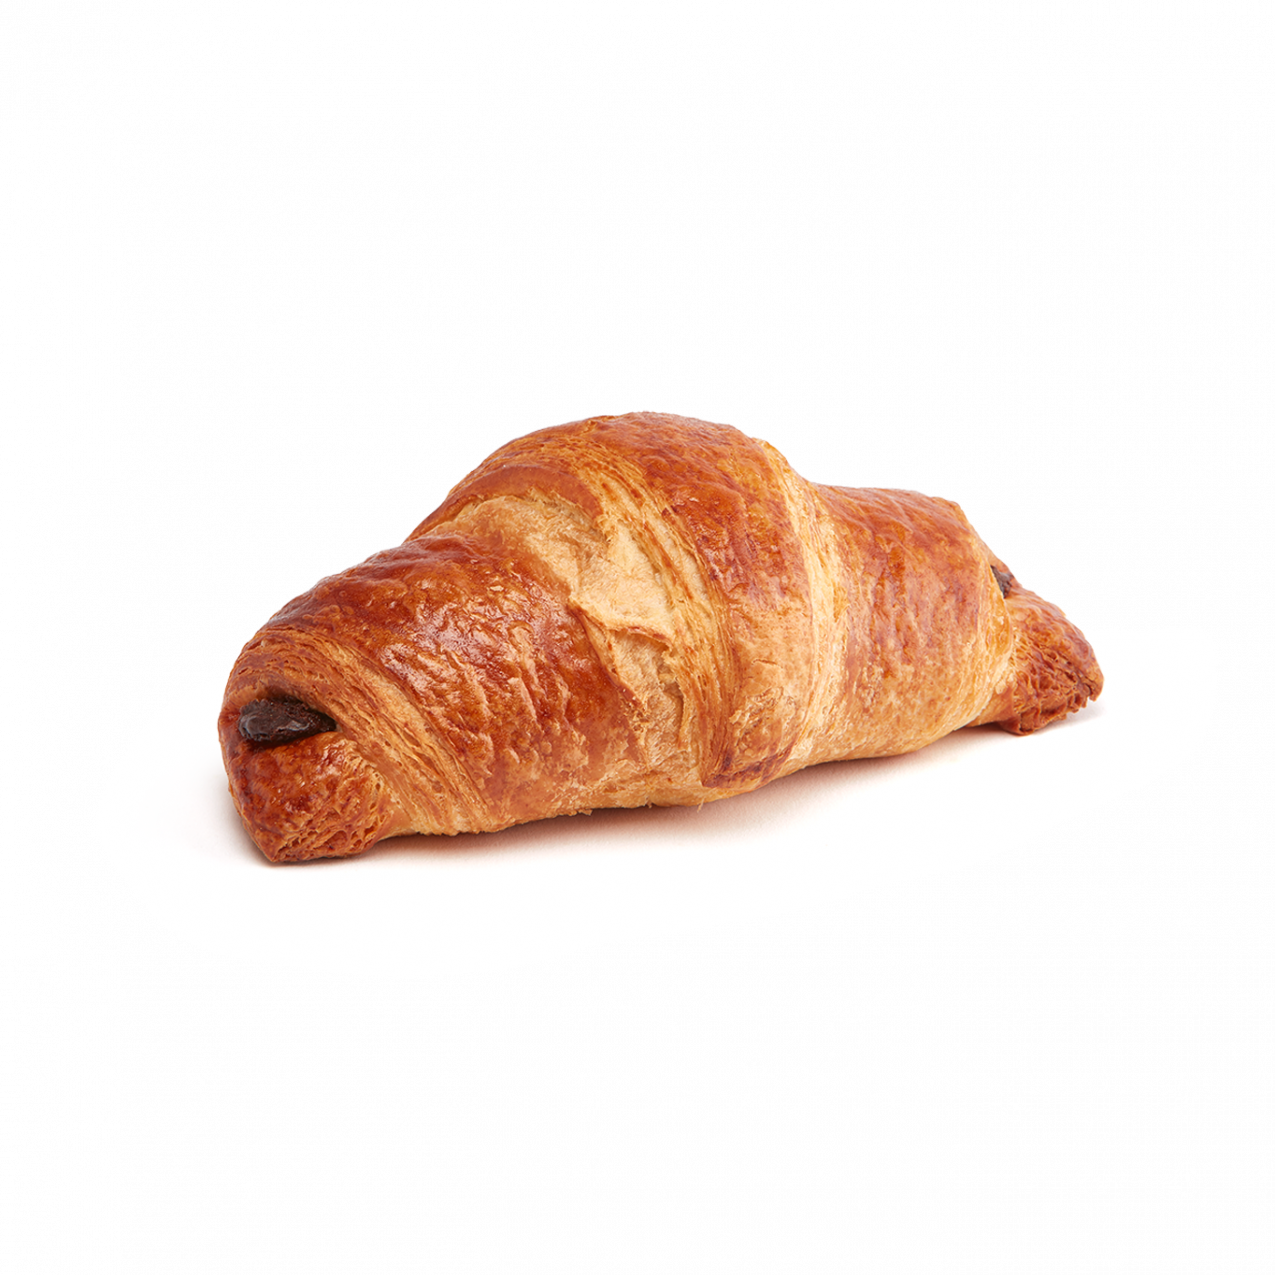 Butter Croissant frozen pastries Pre-baked Ferm. - 90g Choco Straight bread and